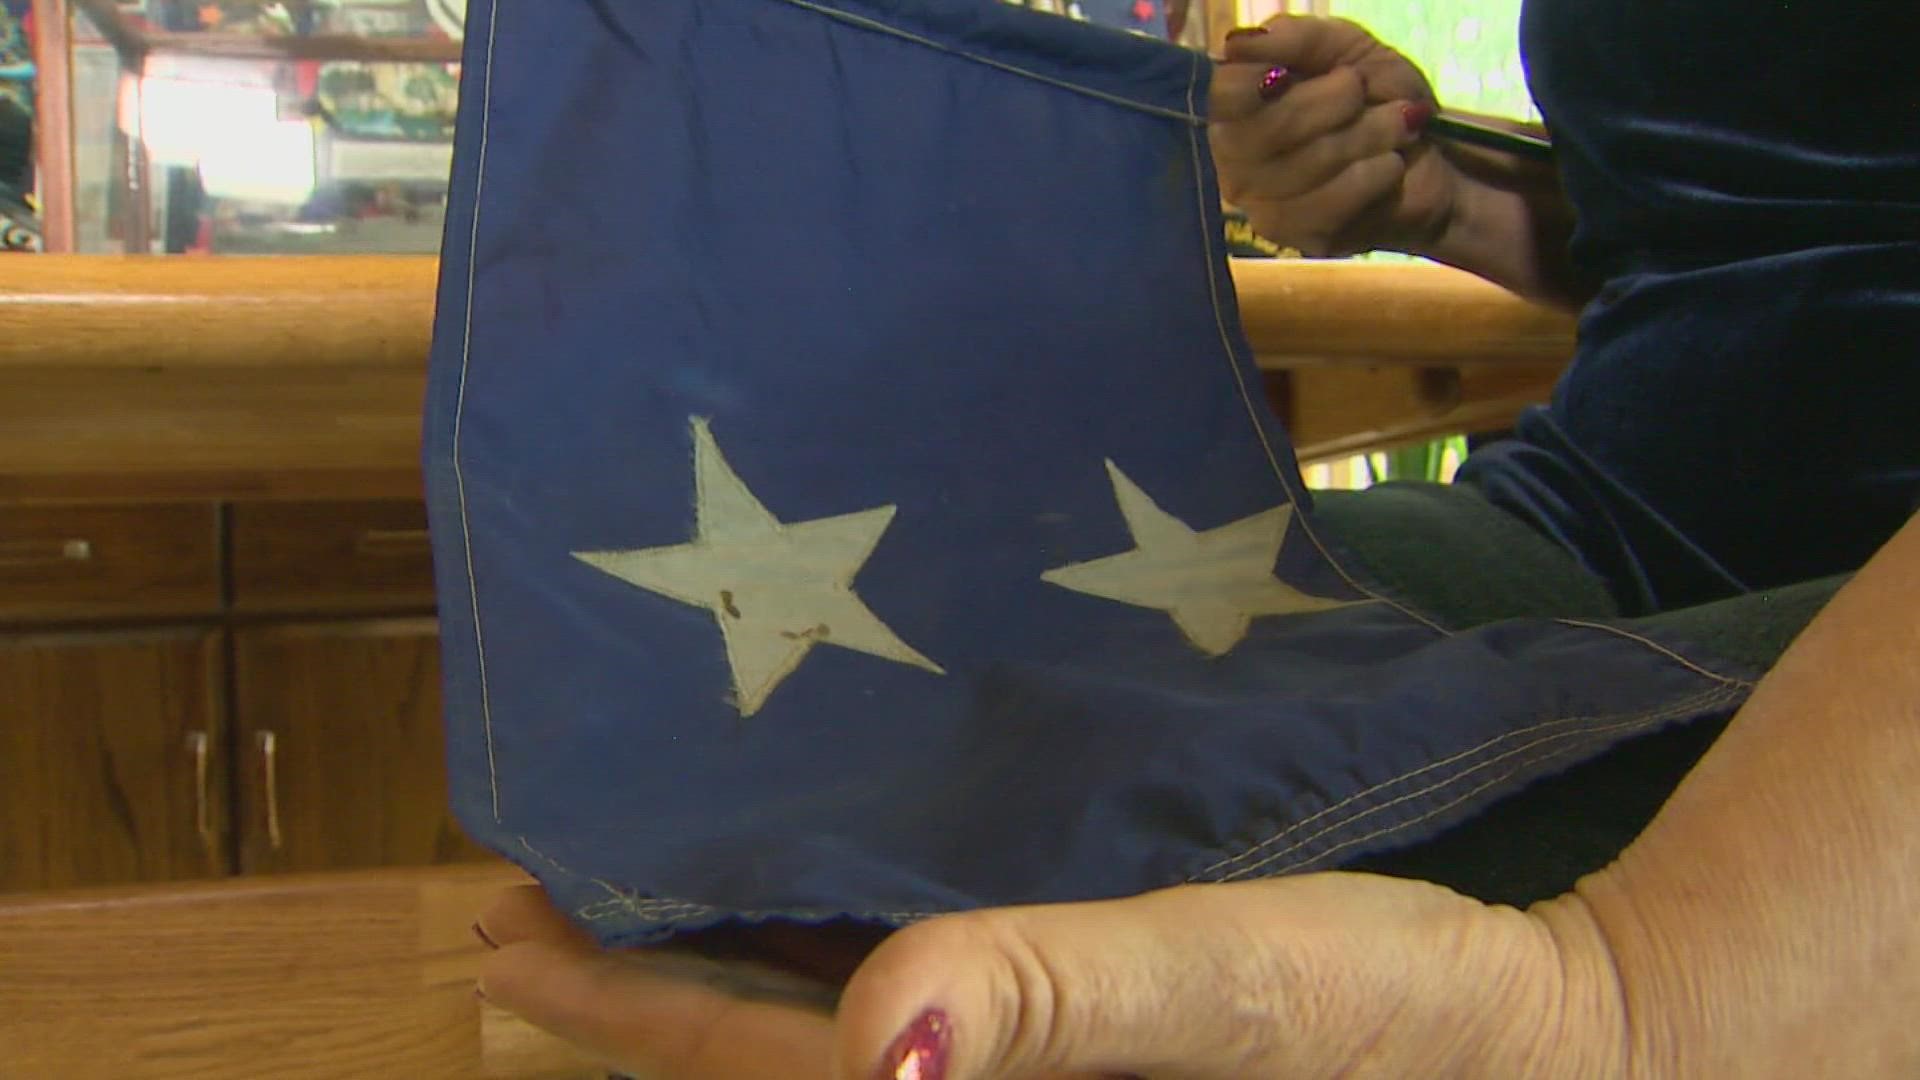 Glenn Harvey Lane, a World War II veteran and Pearl Harbor survivor from Whidbey Island, had one final wish: That his flag be returned to Honolulu.